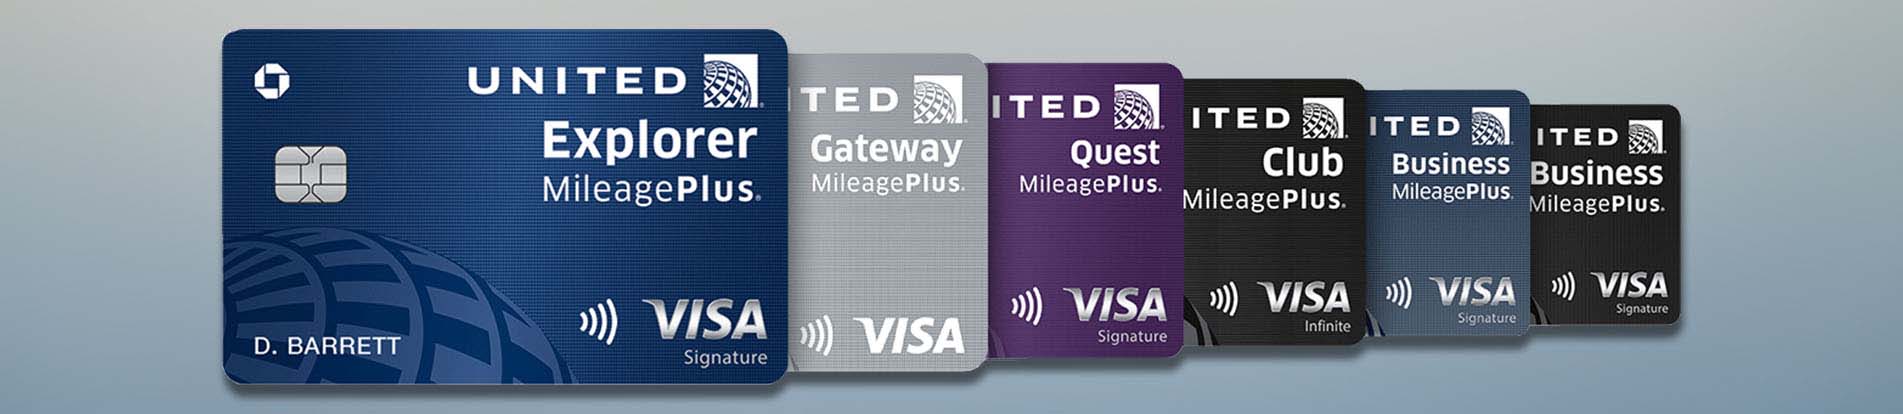 How To Earn United Airlines MileagePlus Points?